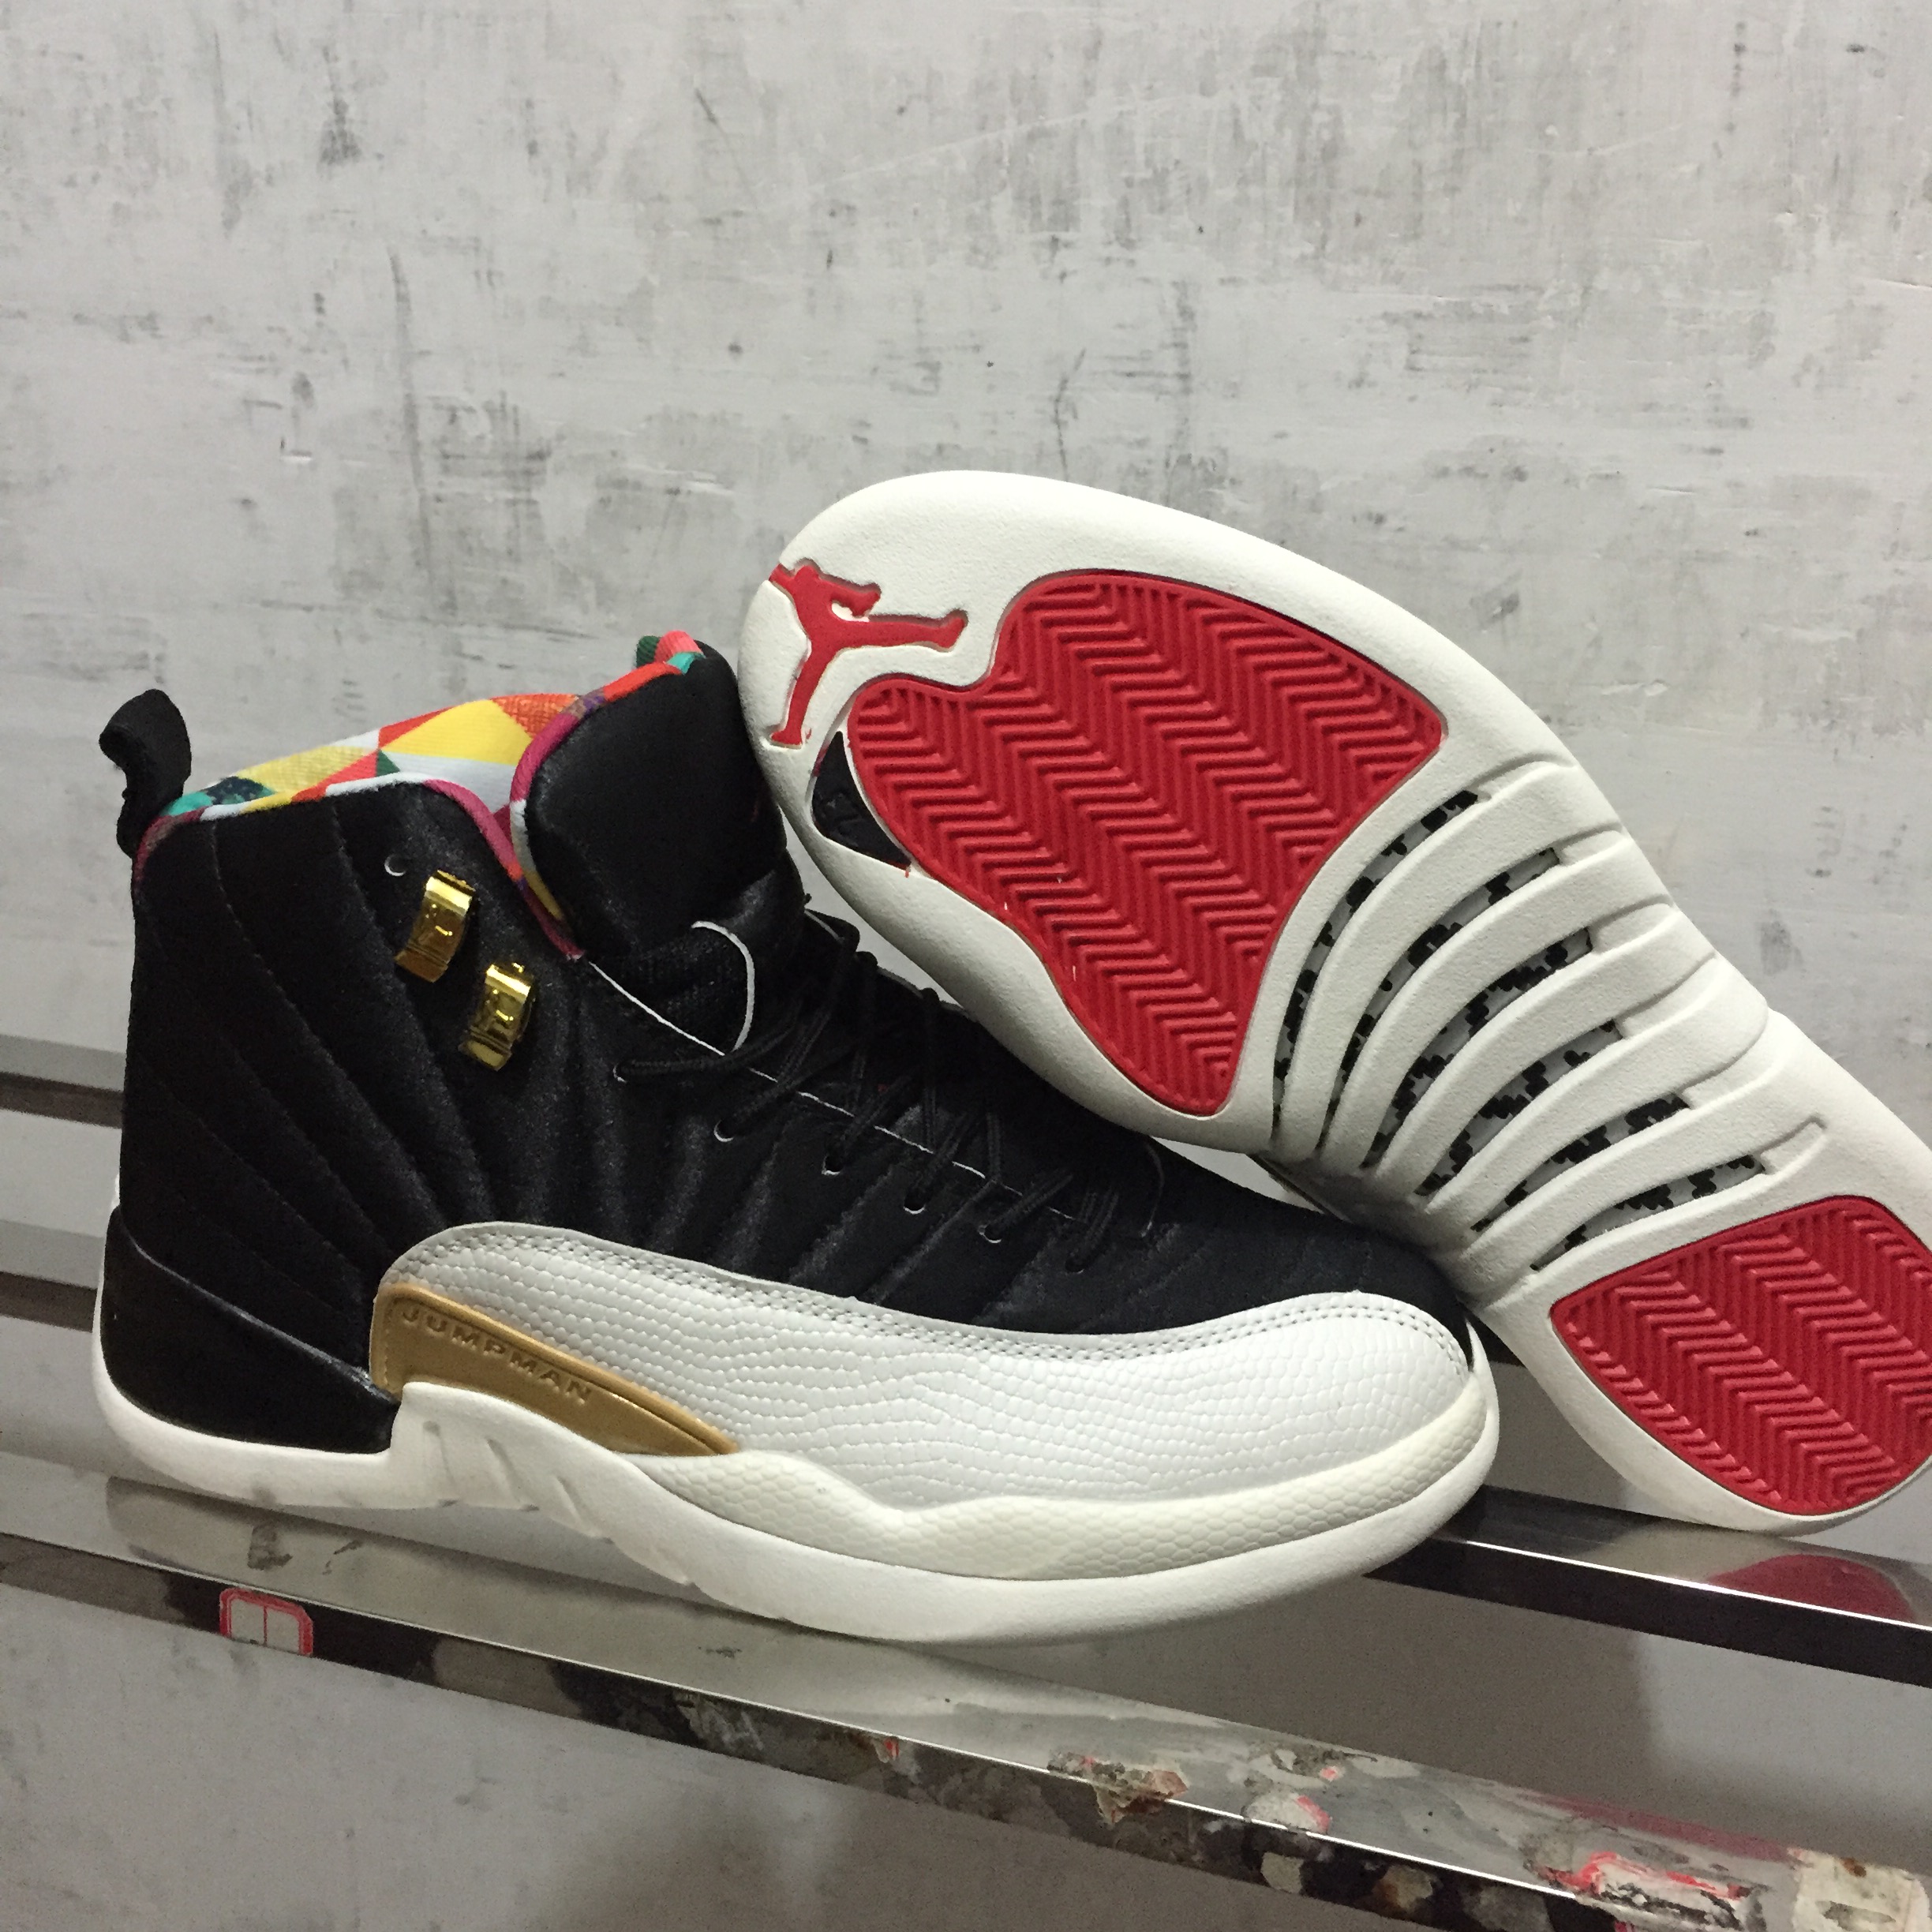 jordan 12 white red and gold